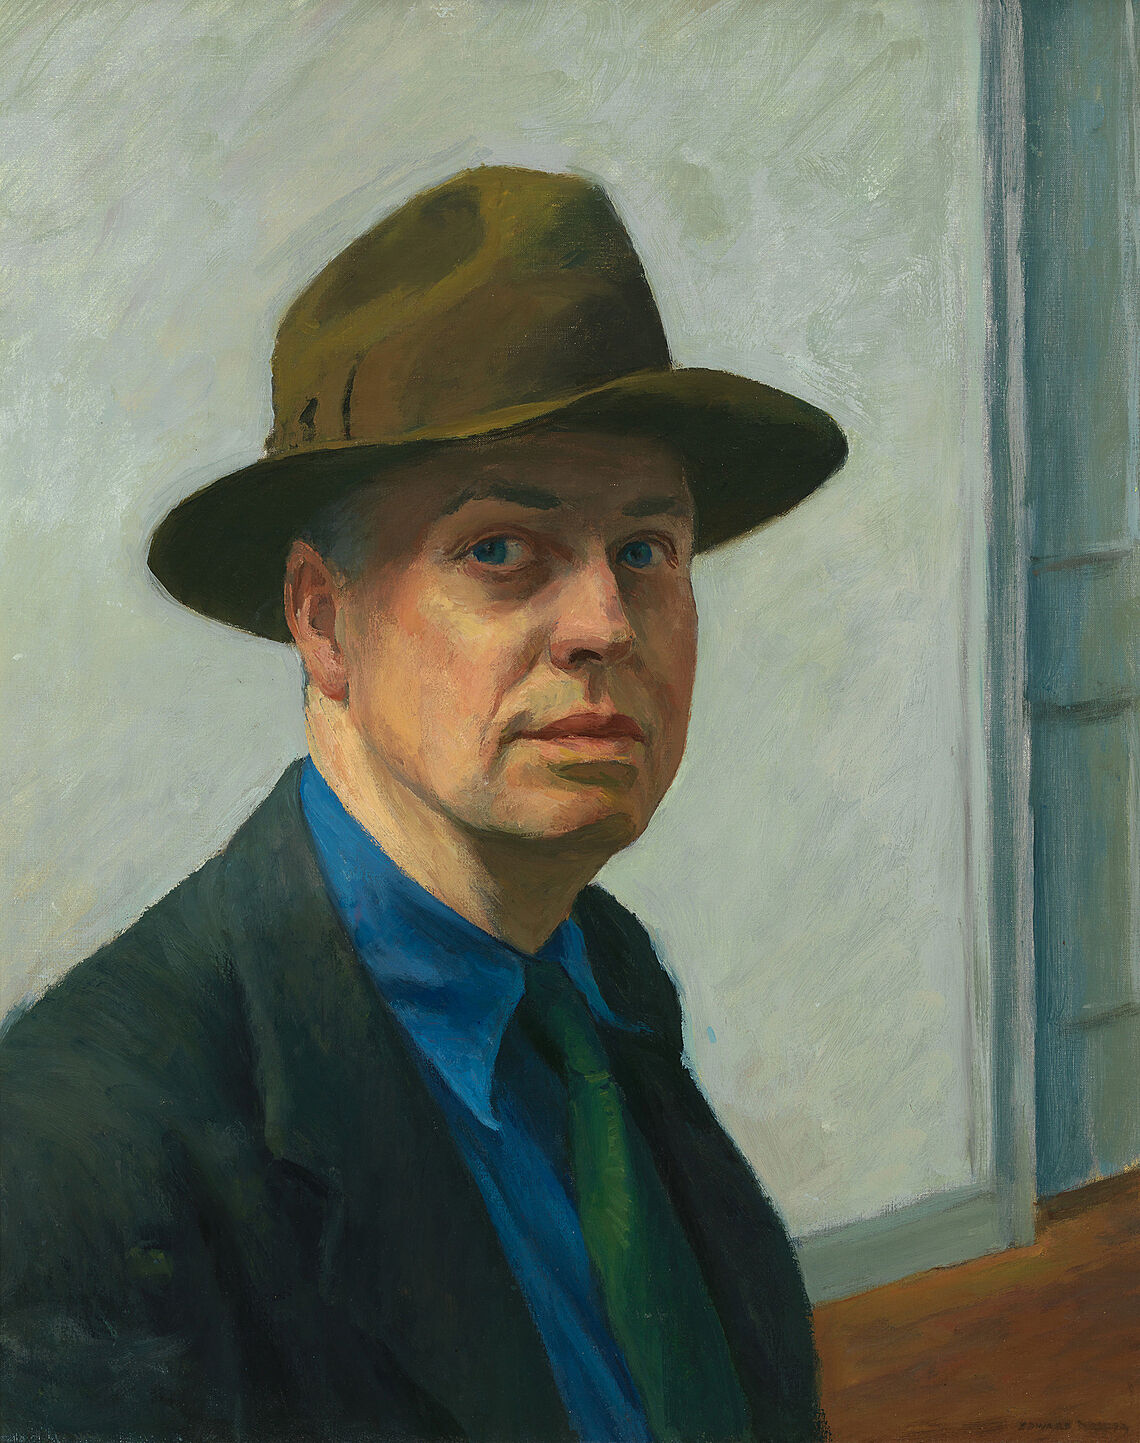 A painting by Edward Hopper depicts the artist wearing a hat and suit